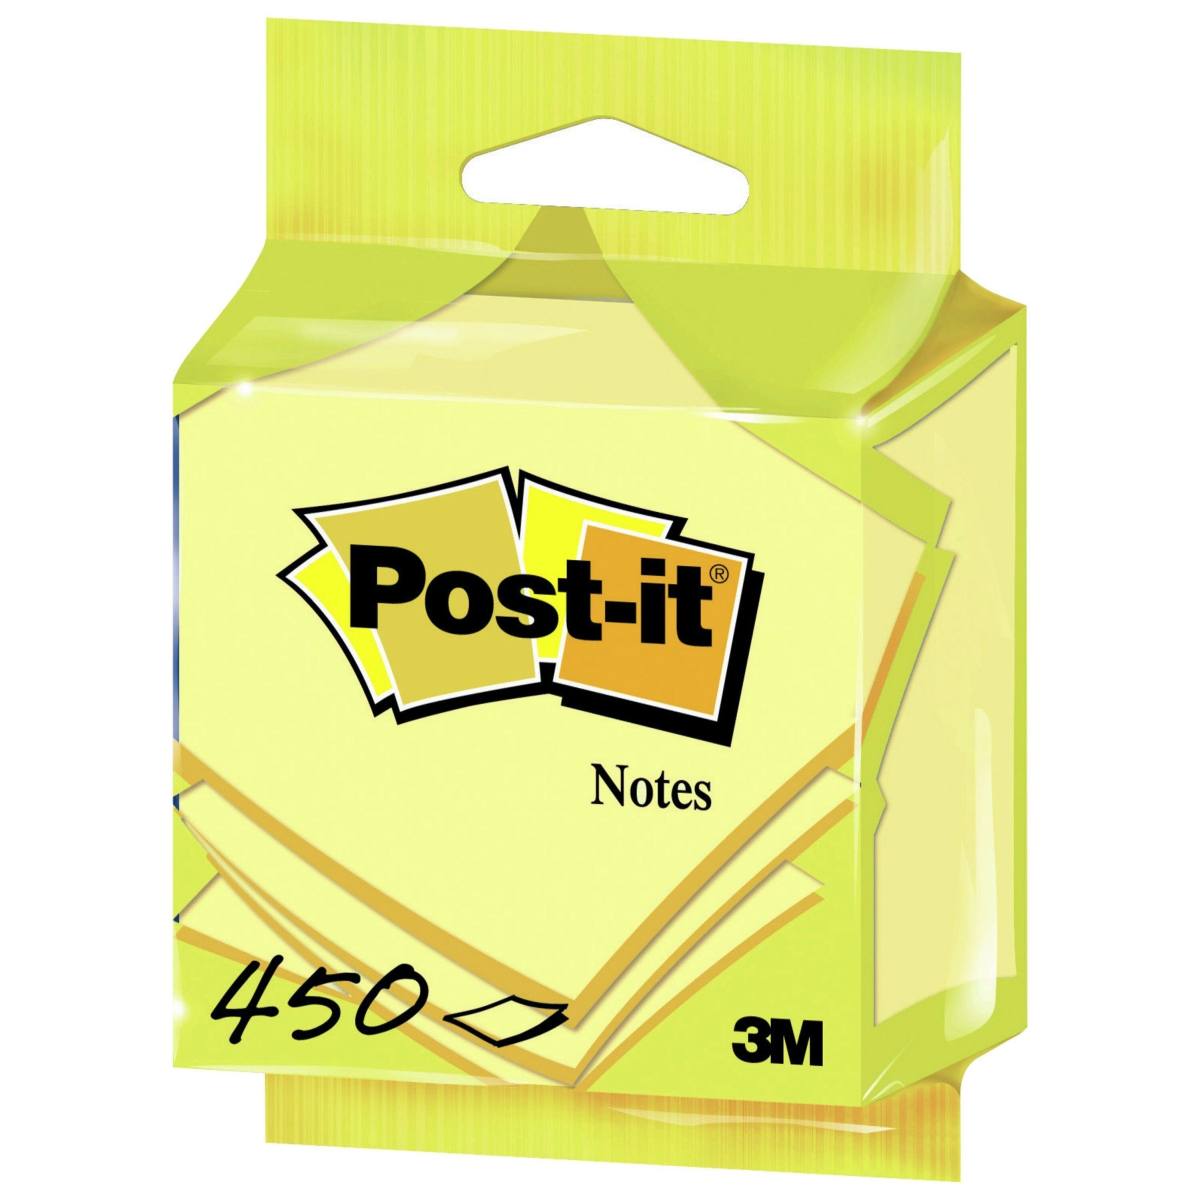 3M Post-it Cube 5426GB, 76 mm x 76 mm, yellow, 1 cube of 450 sheets